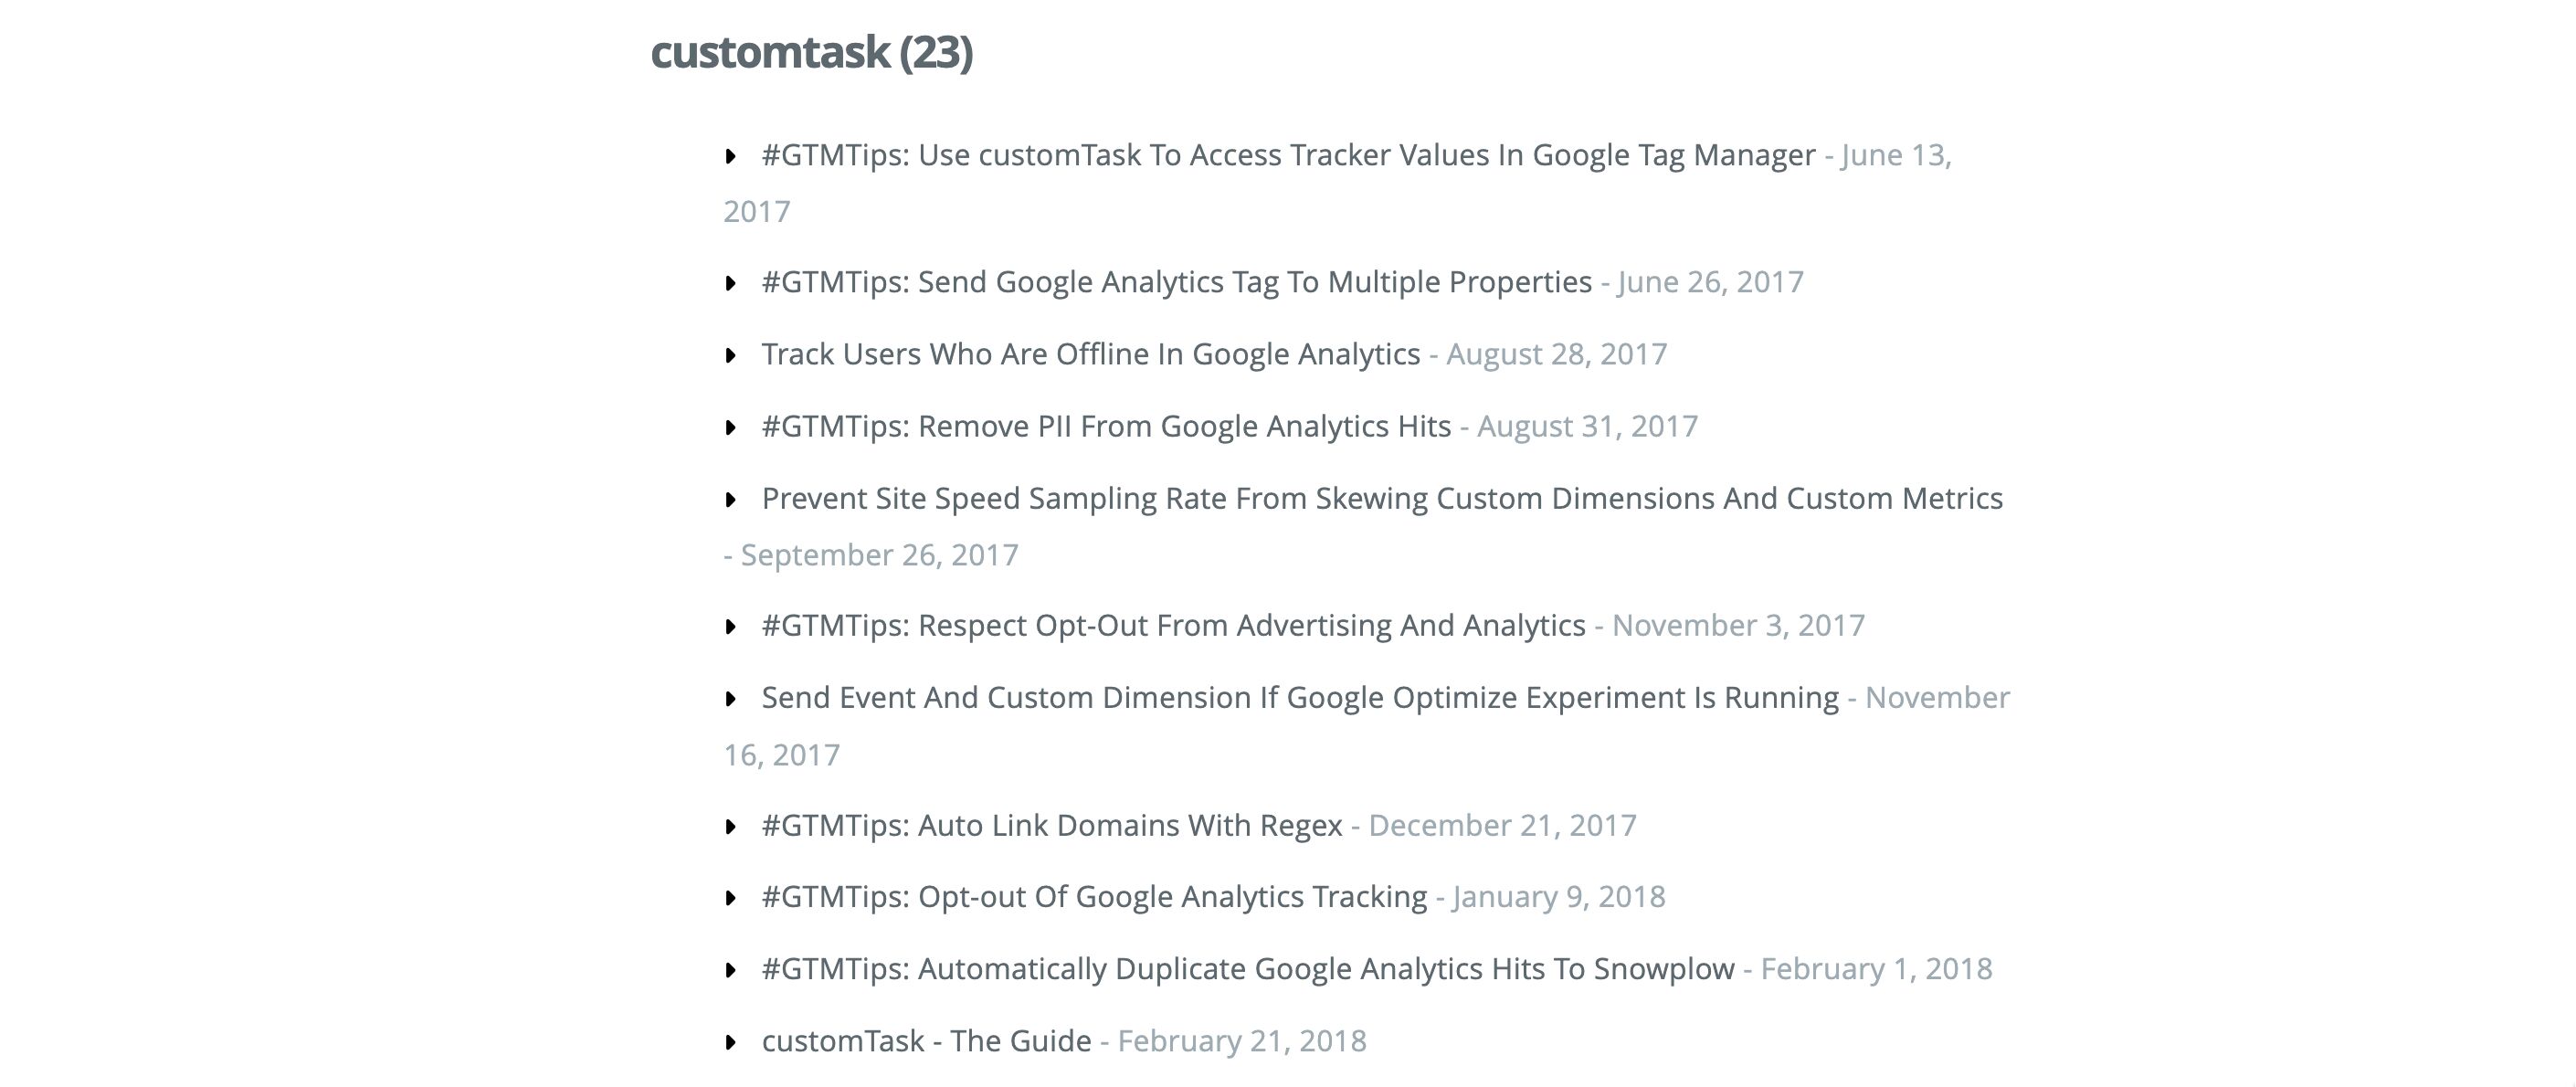 customTask articles